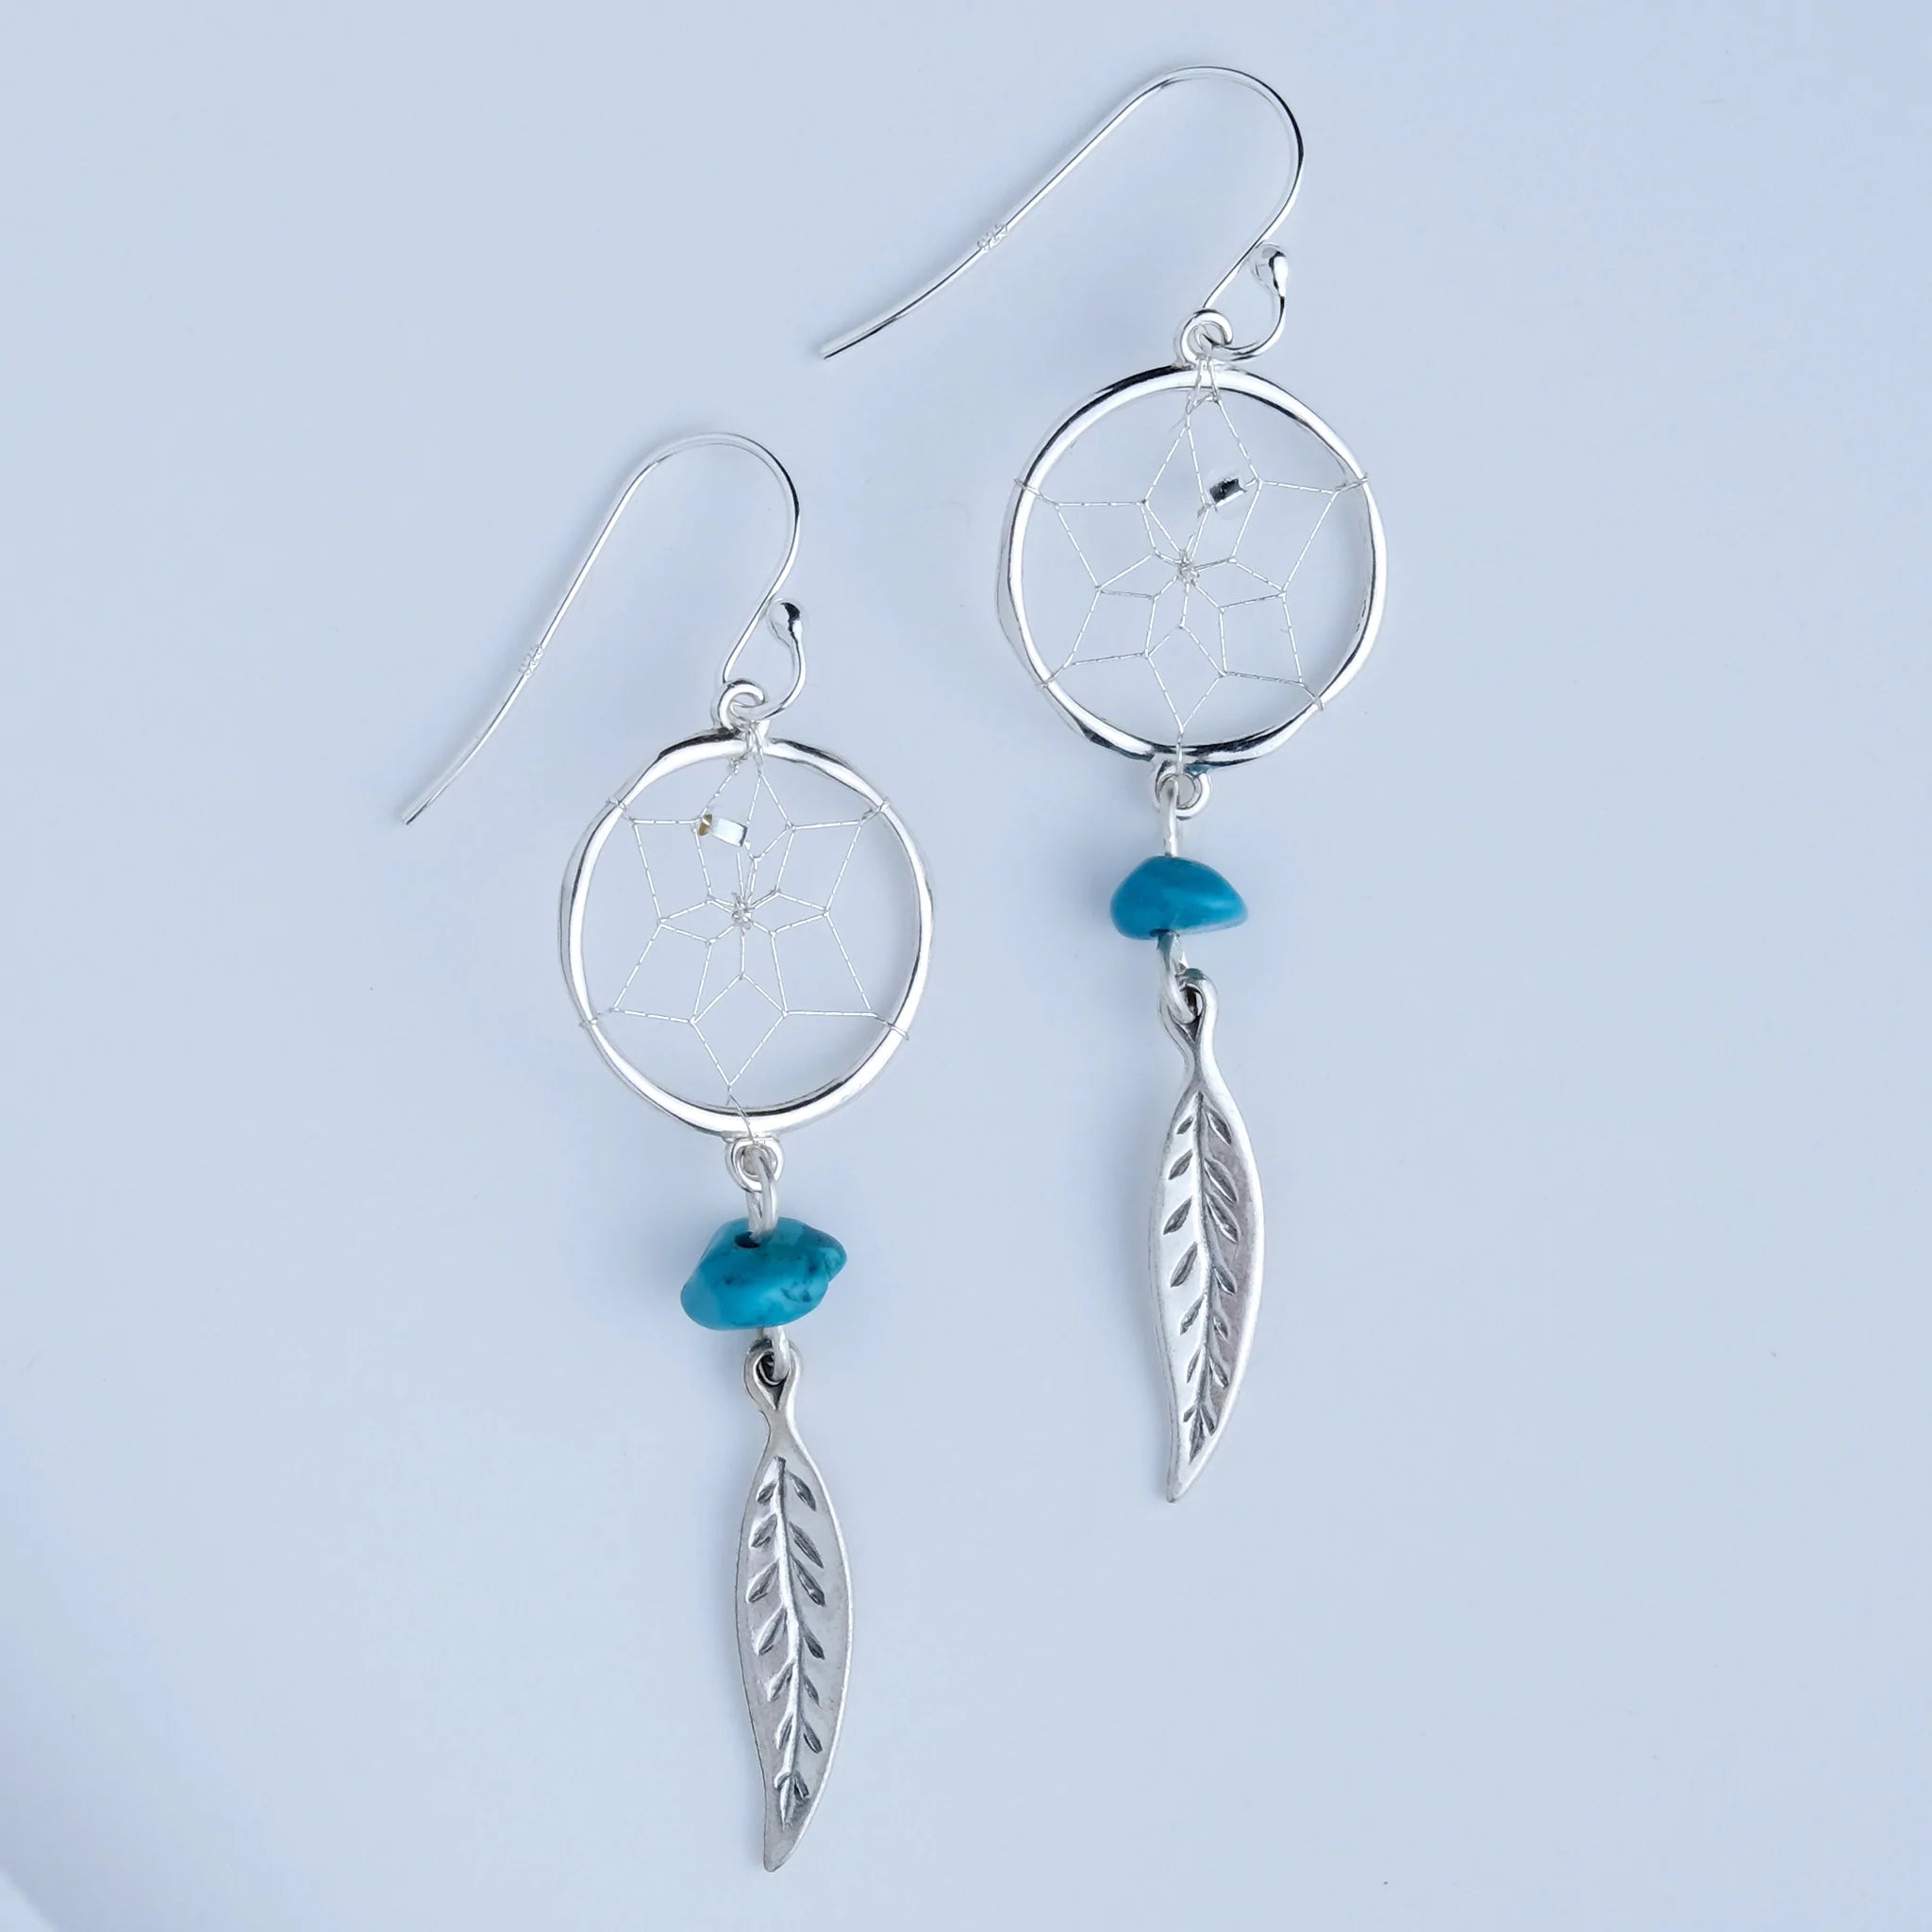 Silver Dreamcatcher Earrings with Feather and Turquoise Stone